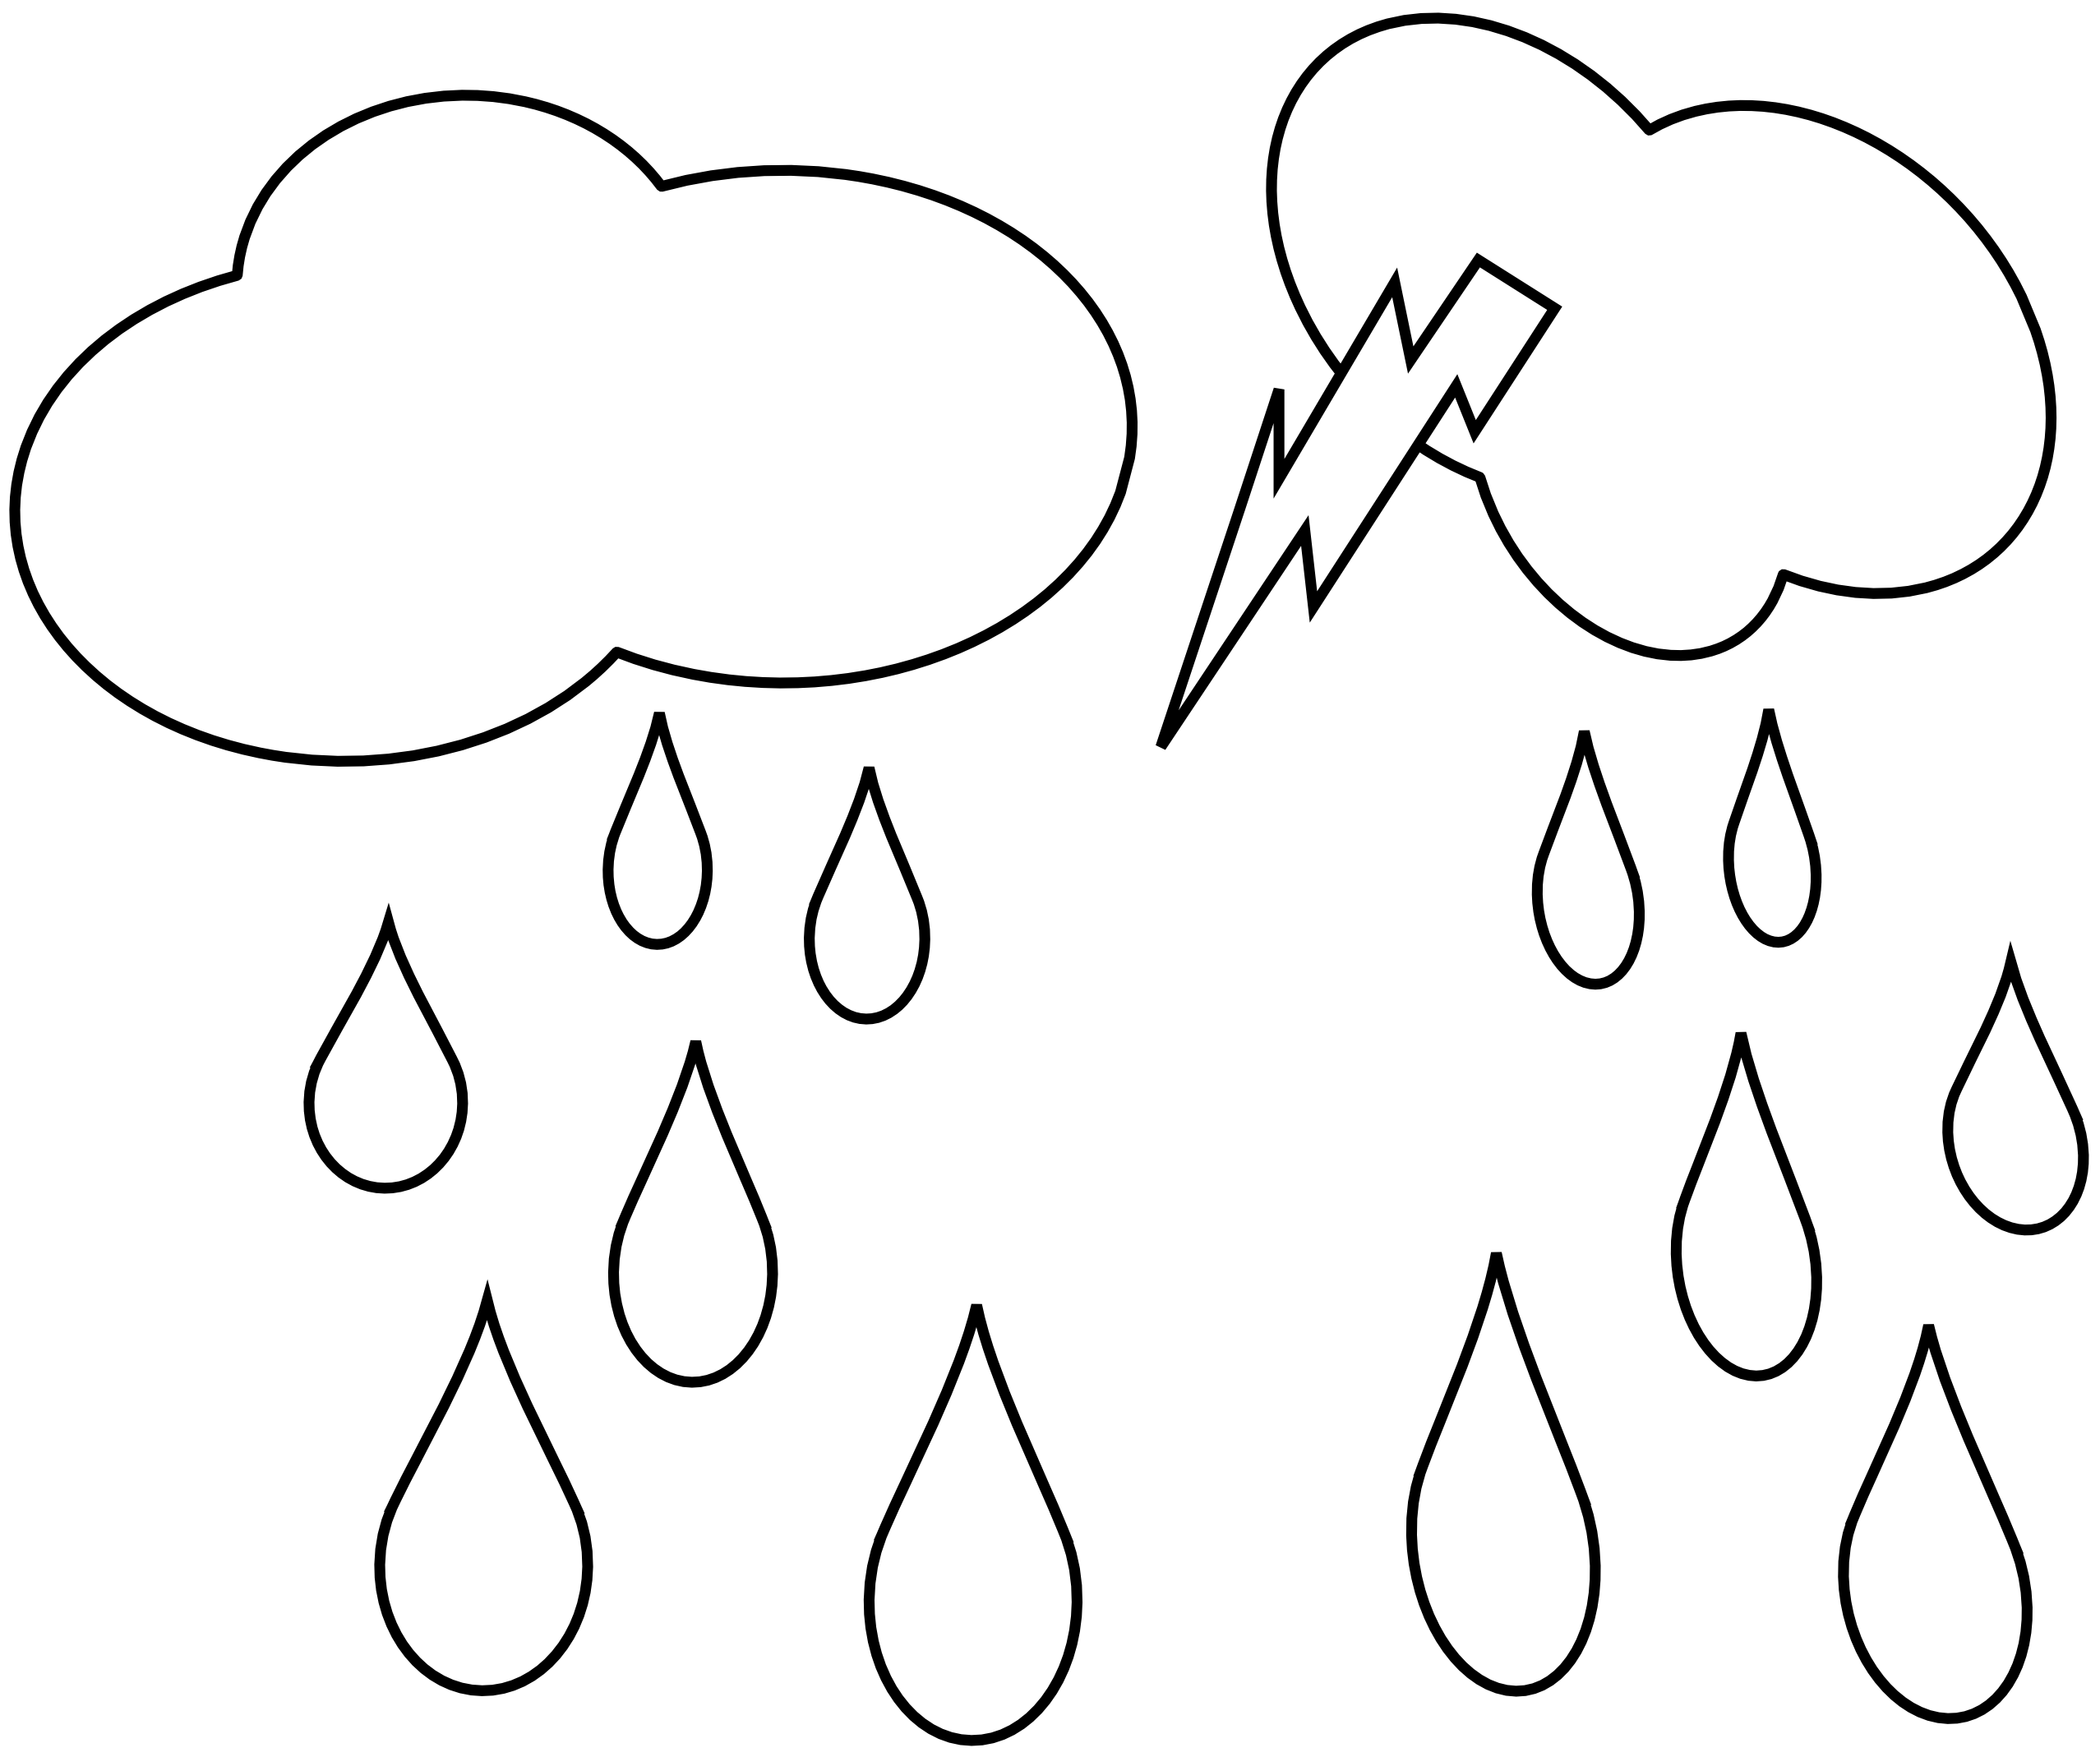 Rain Cloud Clipart Black And White | Clipart library - Free Clipart 